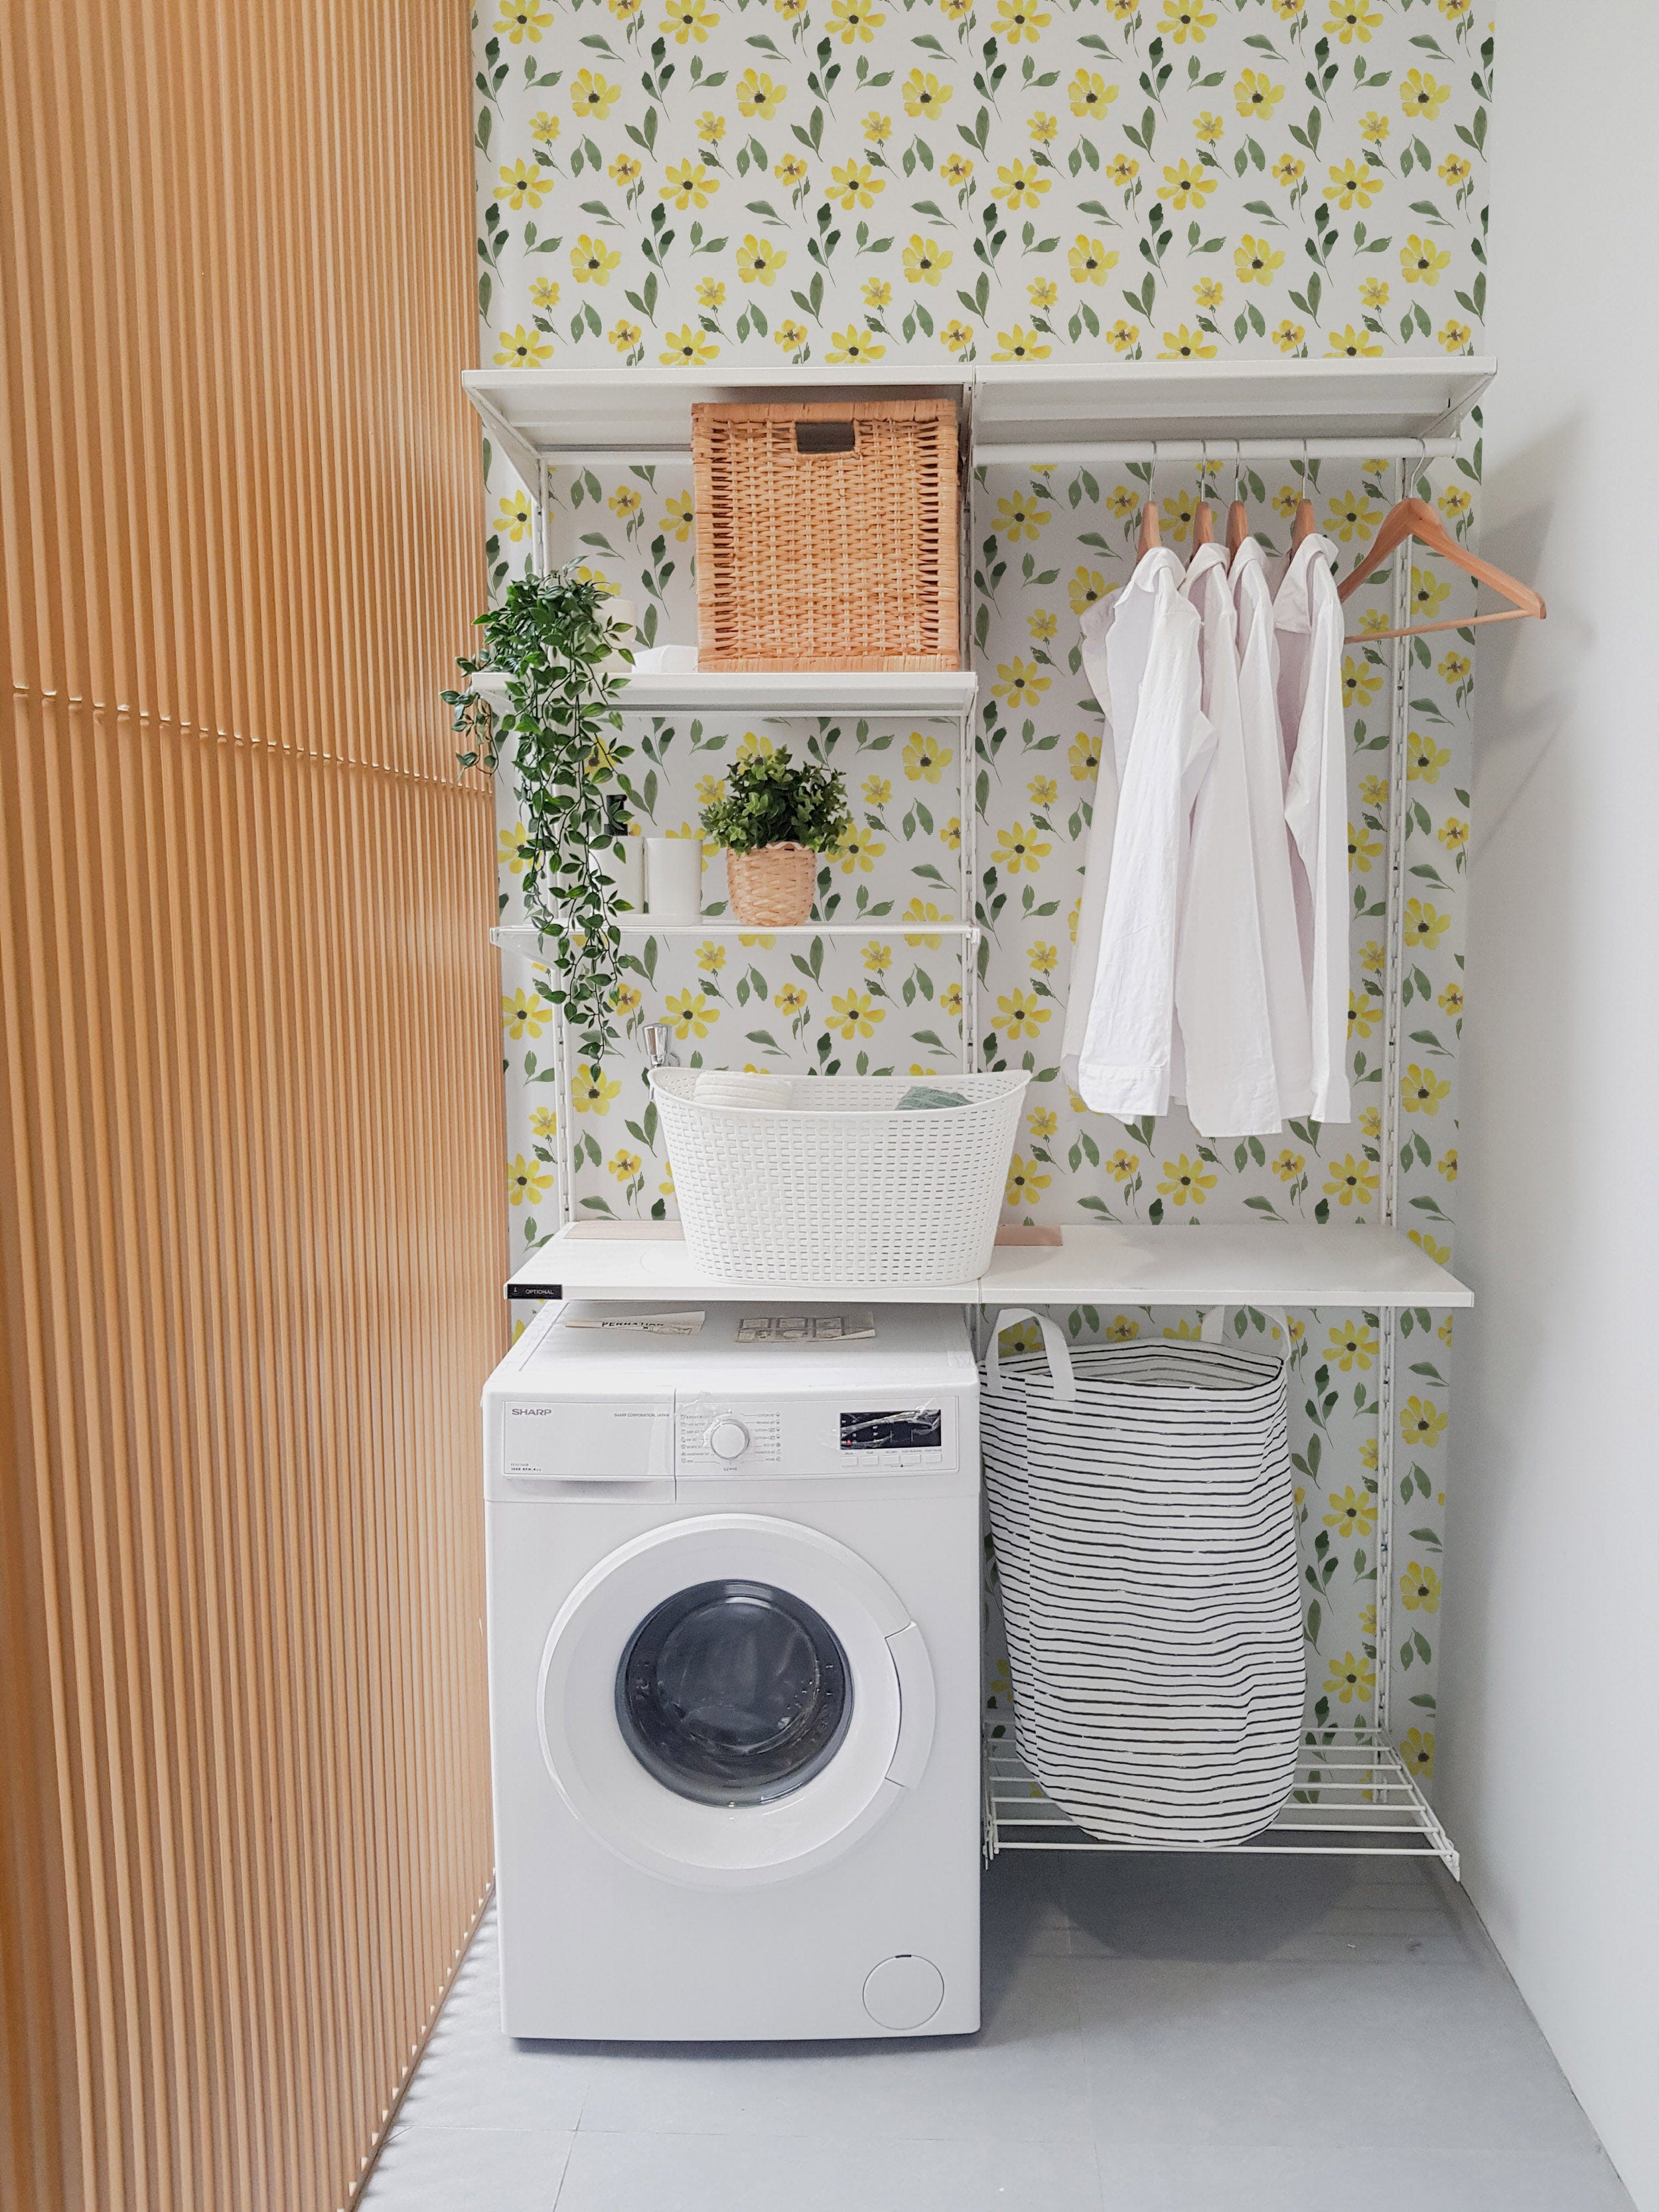 Modern laundry room with a washing machine, wooden shelving, and baskets, featuring Yellow Spring Wallpaper with watercolor yellow flowers and green leaves